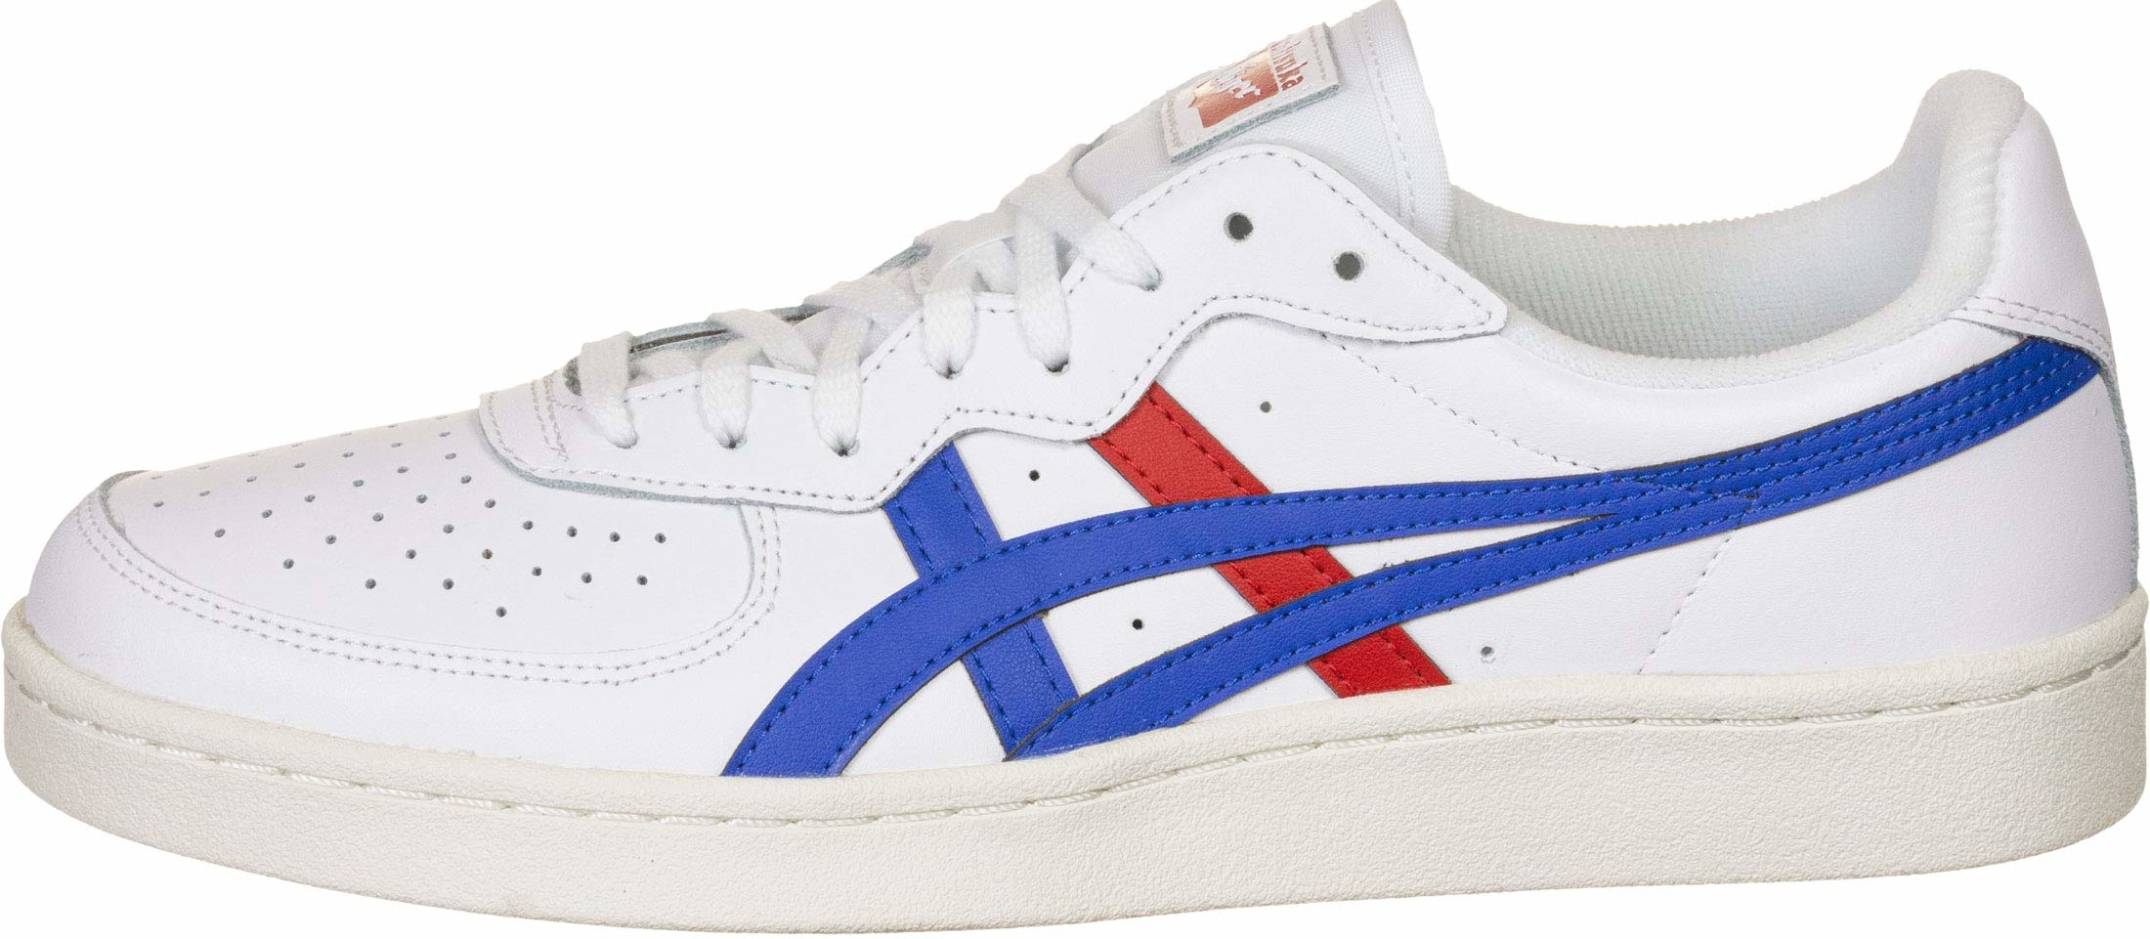 Only $48 + Review of Onitsuka Tiger GSM 